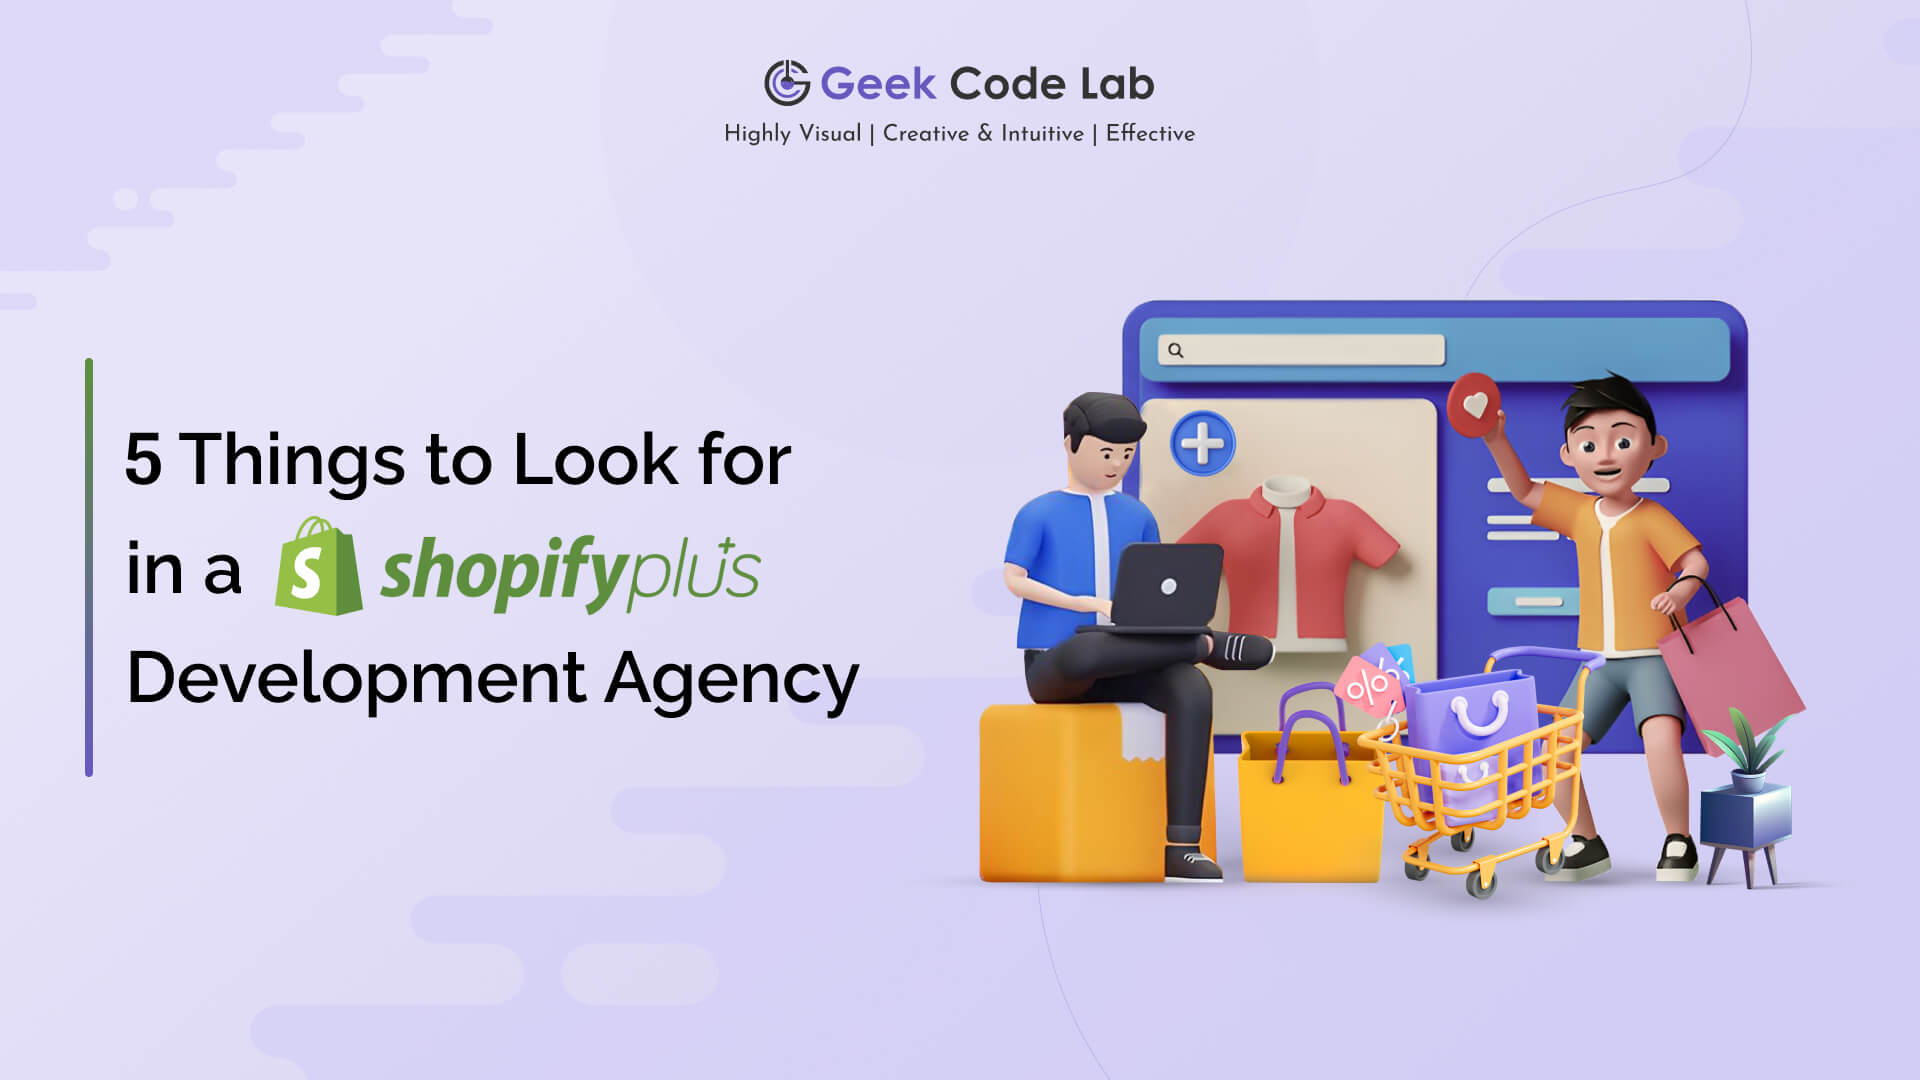 5 Things to Look For in a Shopify Plus Development Agency